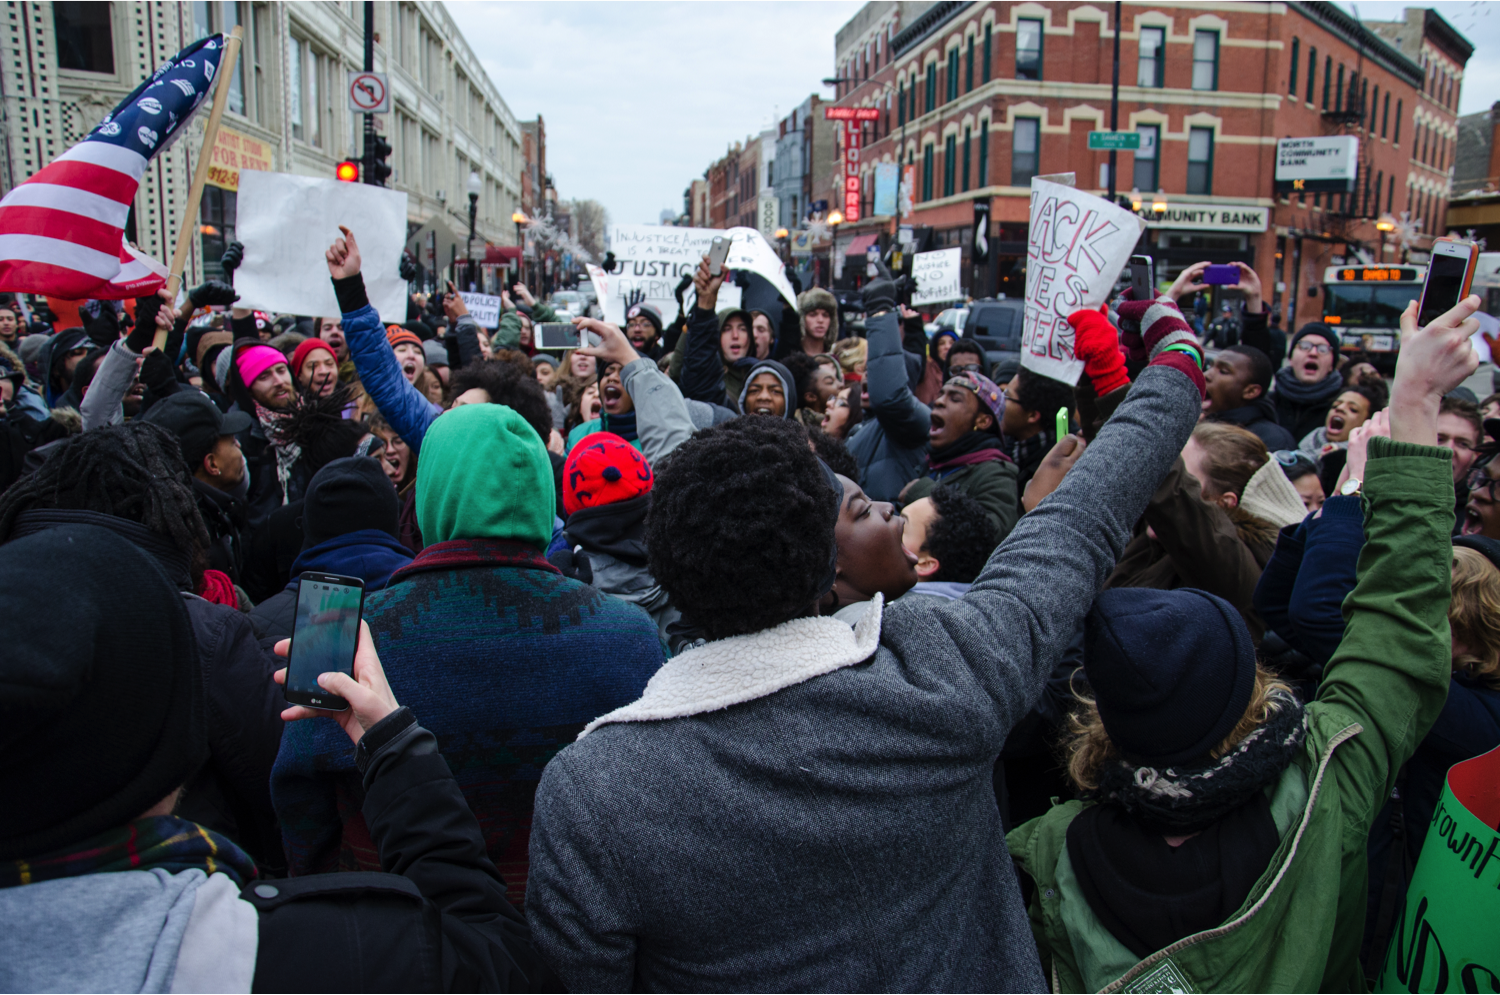 Protesters block the traffic at Damen and Milwaukee Avenues, chanting “we did this for Mike Brown,” “the racist cops, we don’t need them” and “black lives matter.” The organizer Kristiana Colón estimated that about 500 people were participating at the peak of the demonstration. (Jin Wu/Medill)